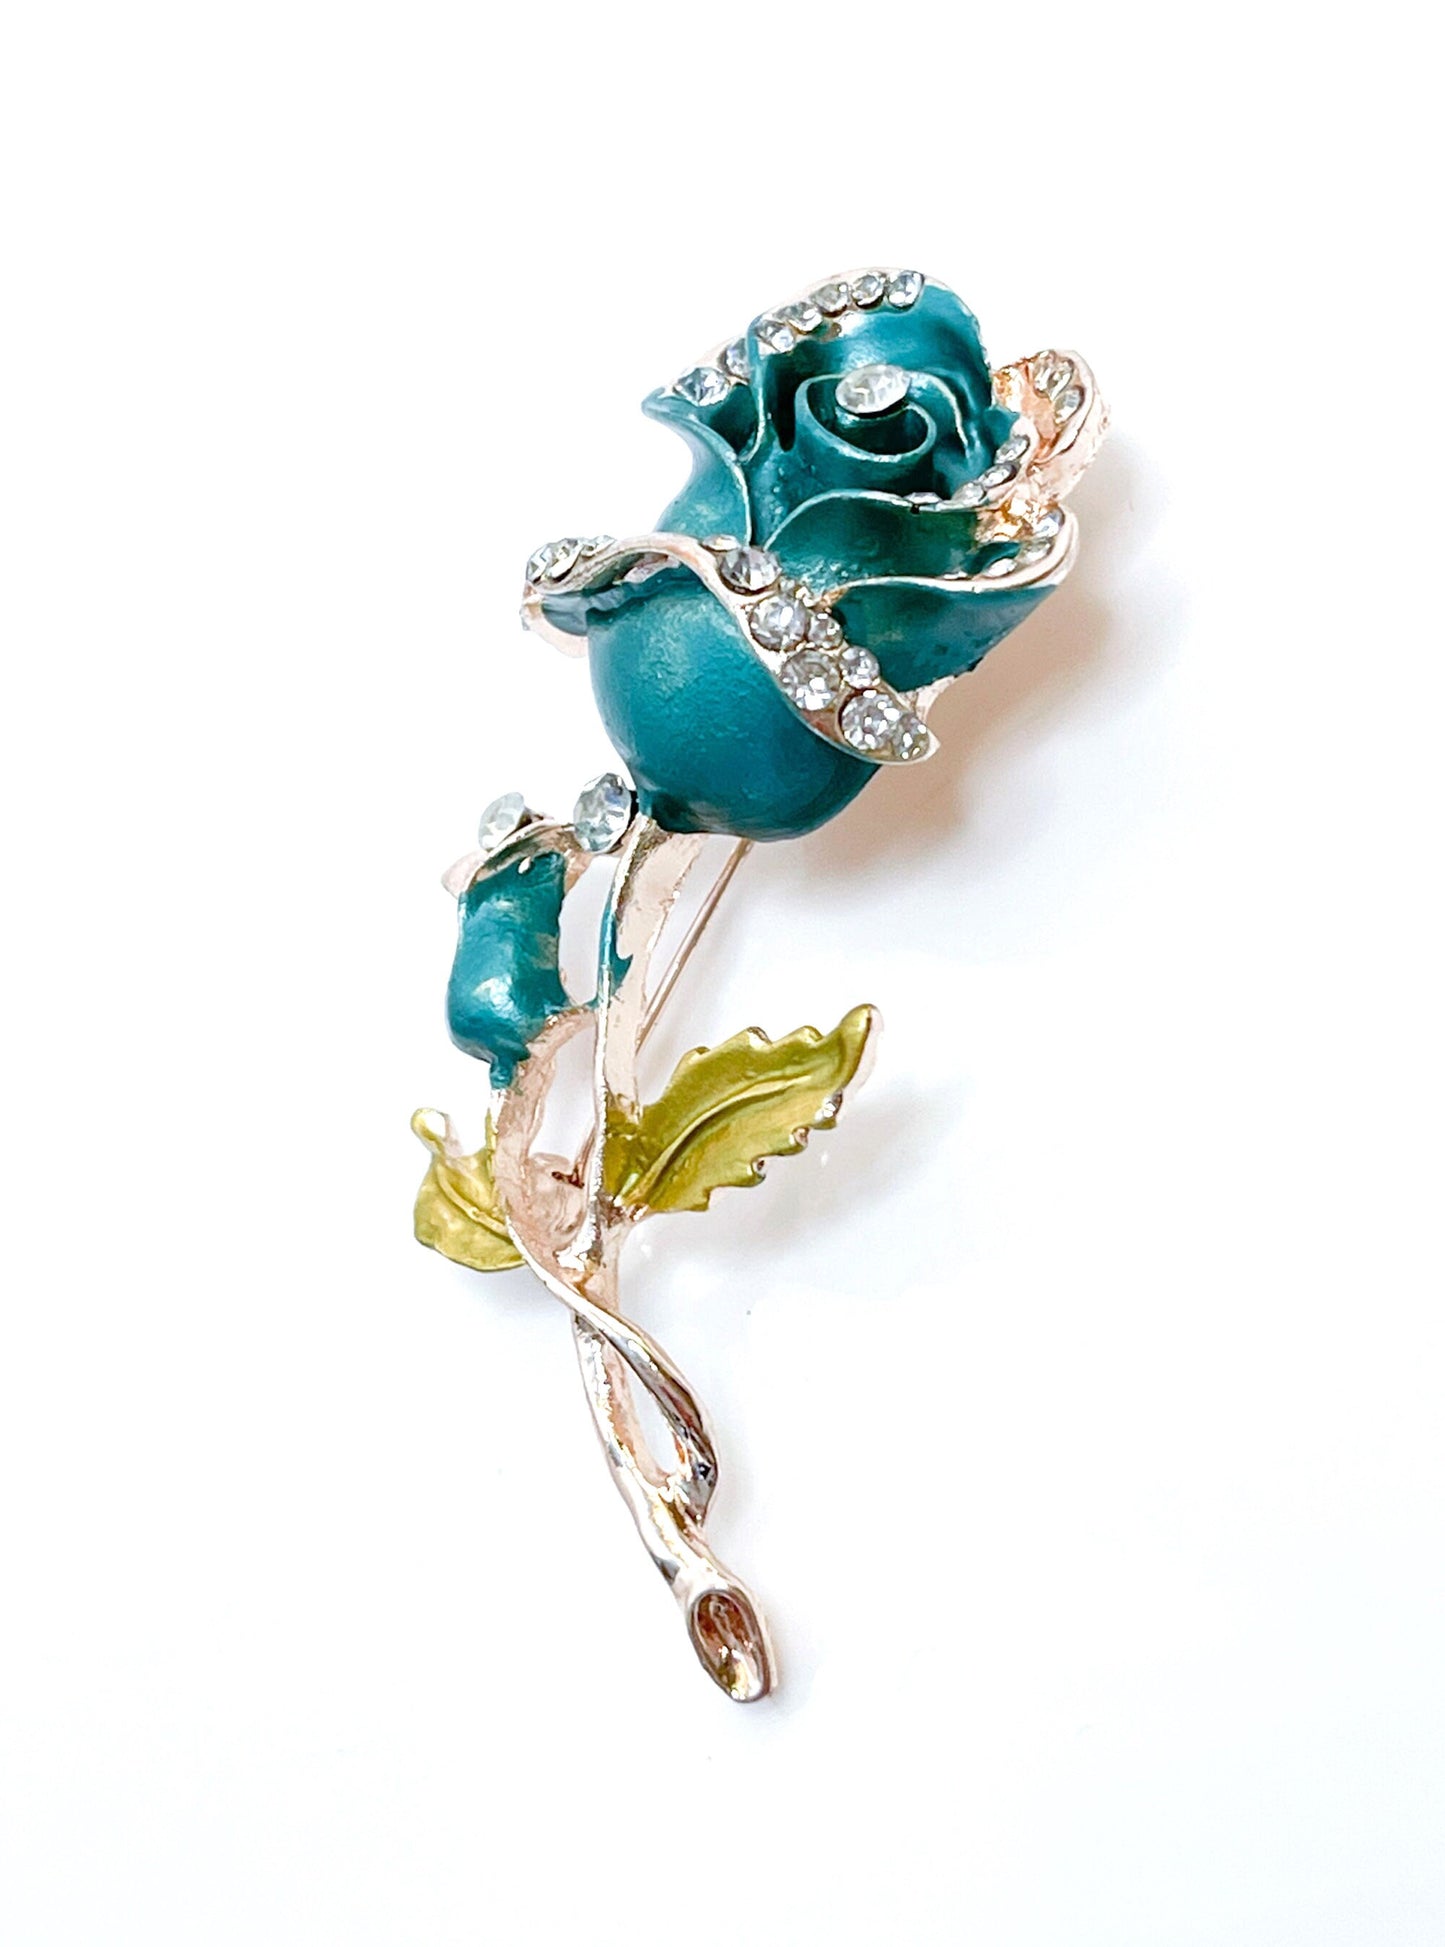 Vintage Single Blue Rose Brooch, Blue Gold Rose with Crystals, Flower Jacket Pin, Brooches For Women